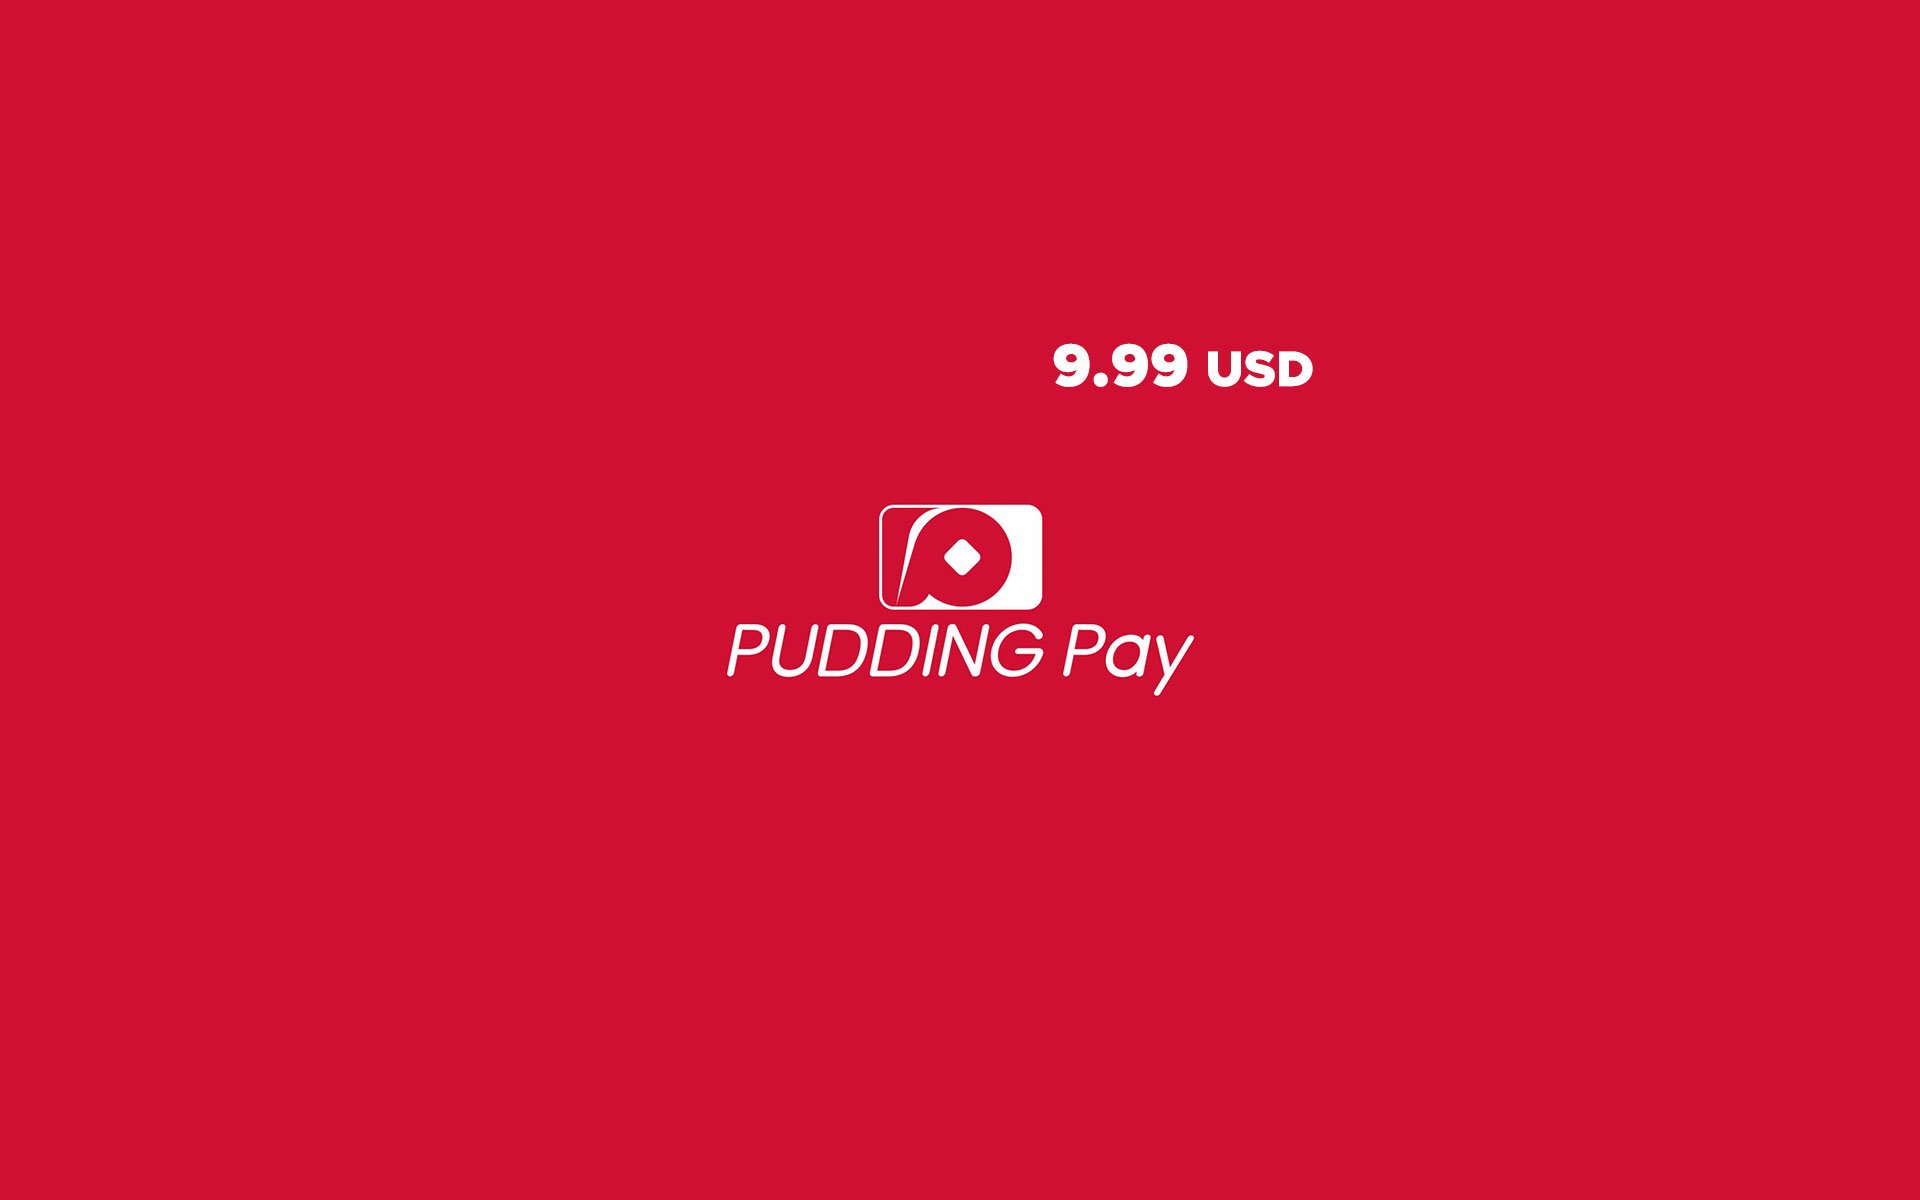 9.99 USD Pudding Pay